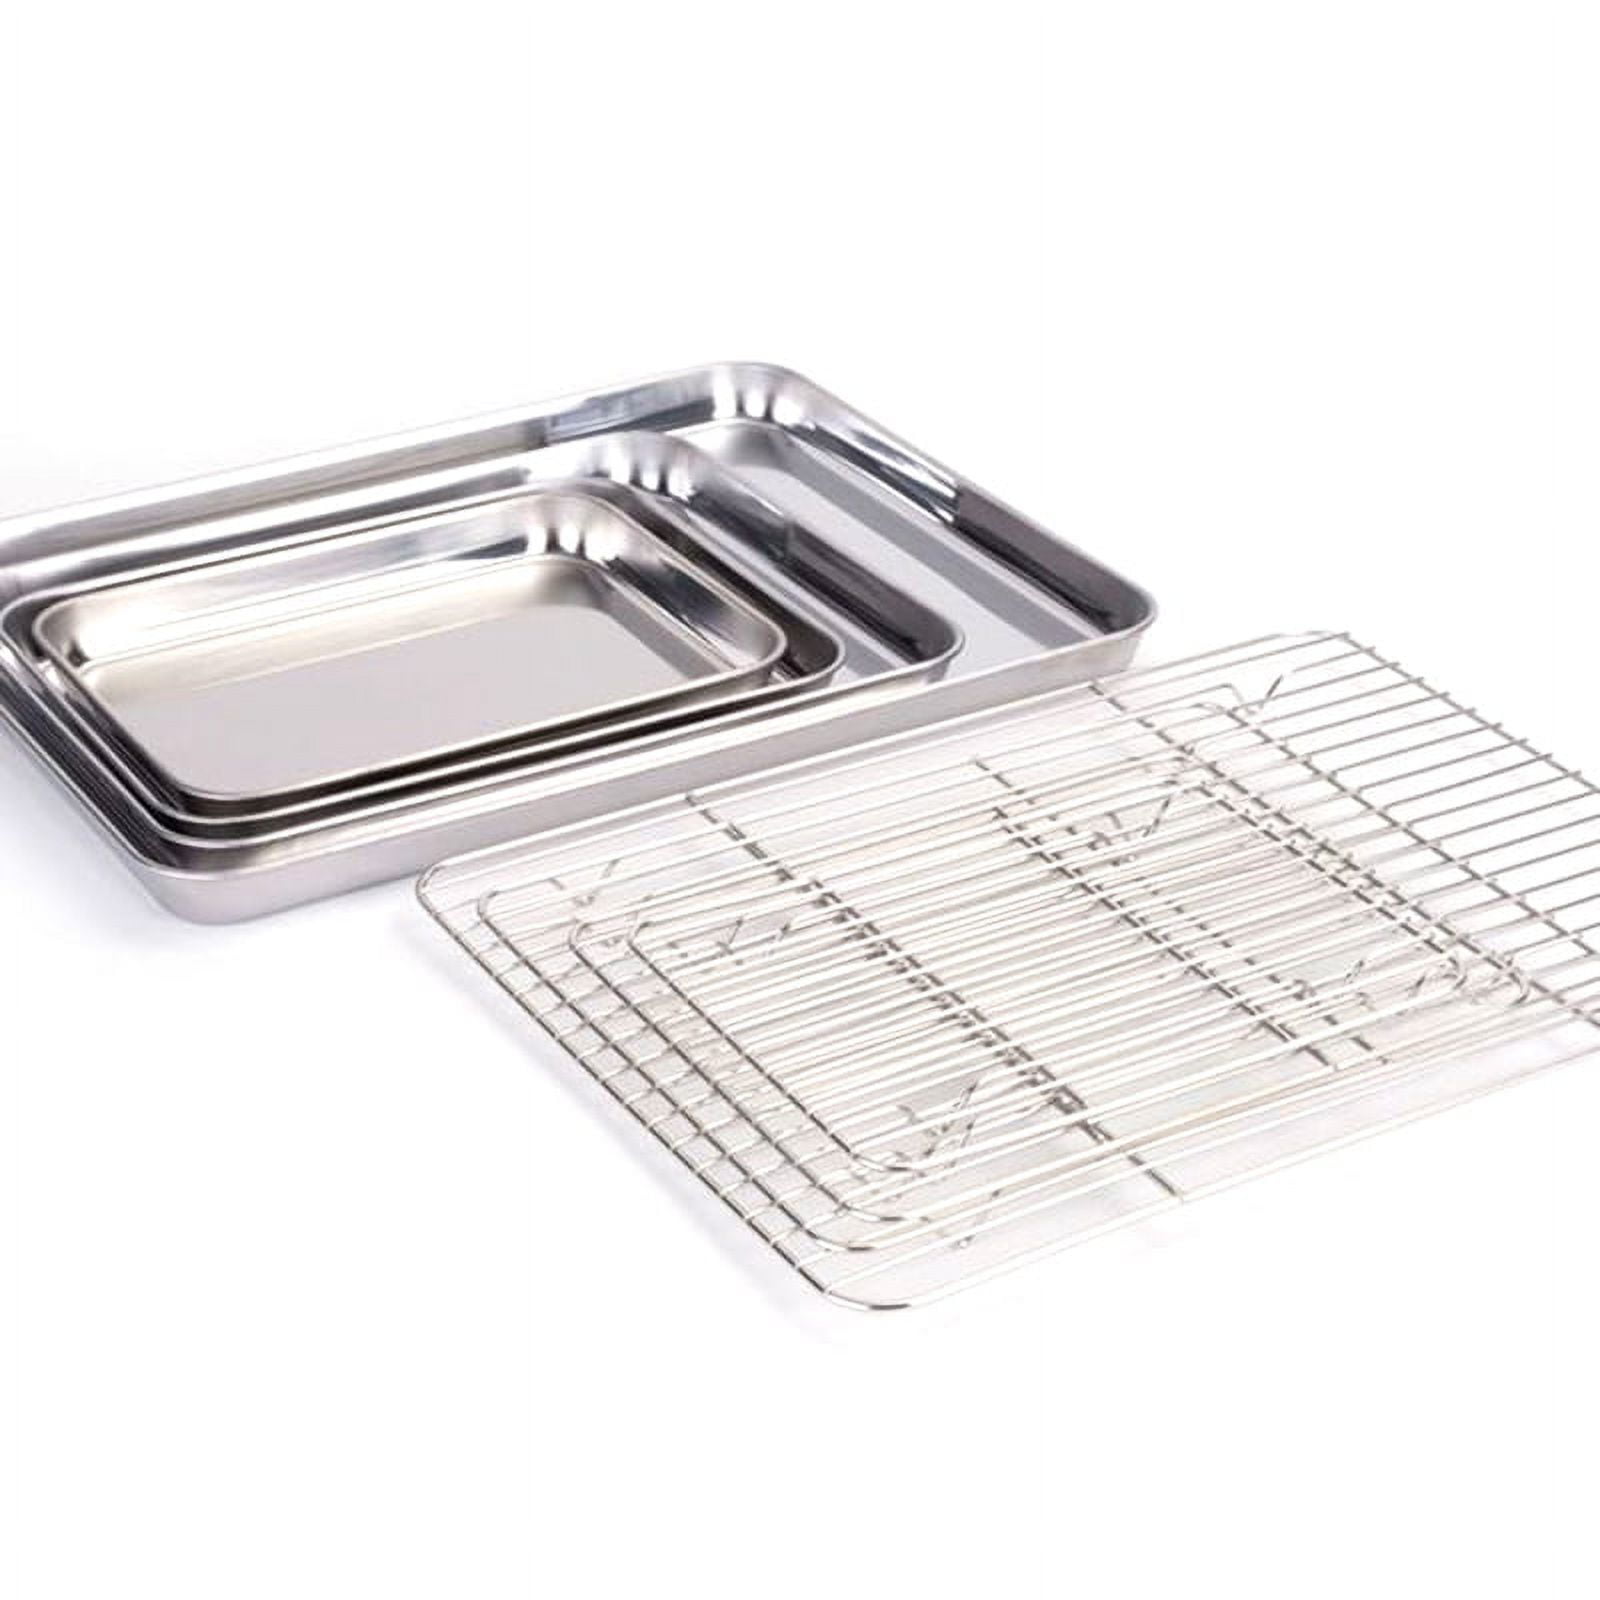 TRIANU Baking Pan with Cooling Rack Set, 10.2 inch Stainless Steel Baking  Tray and Cooking Rack, Dishwasher Safe